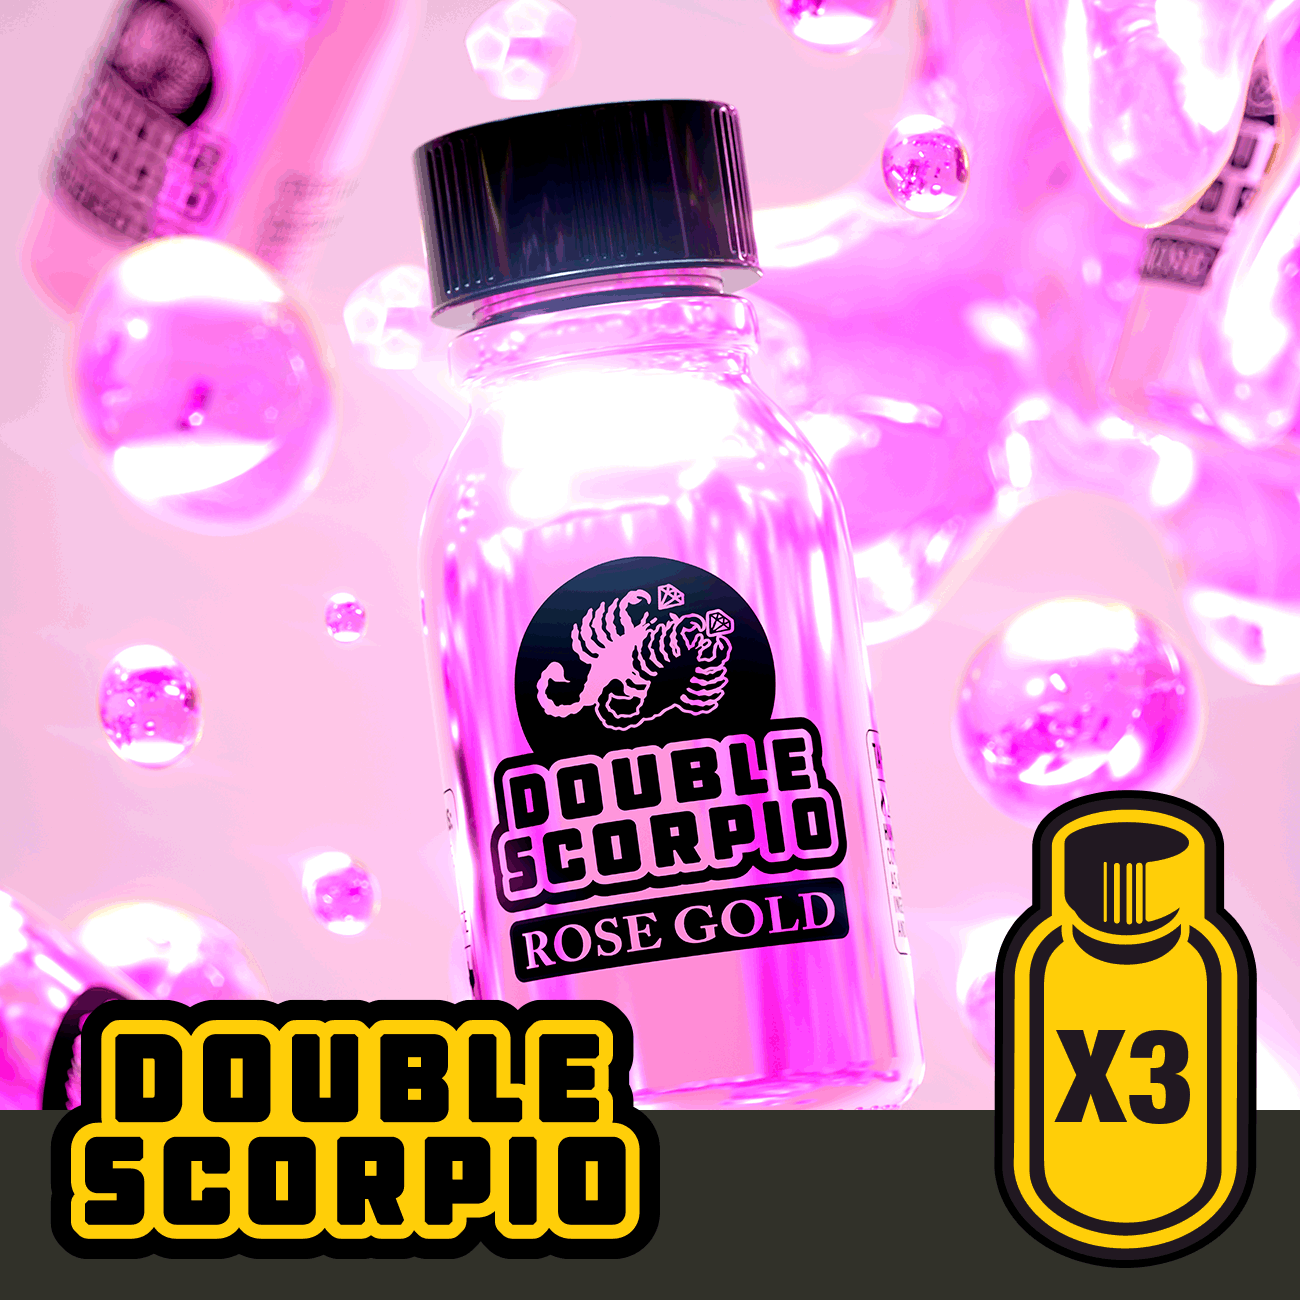 A vibrant pink-themed image featuring a 10ml bottle of Double Scorpio White Gold - Triple Pack (10ml x 3) against a backdrop of luminous bubbles and crystal-like structures, with a stylized 'x3' and a duplicate